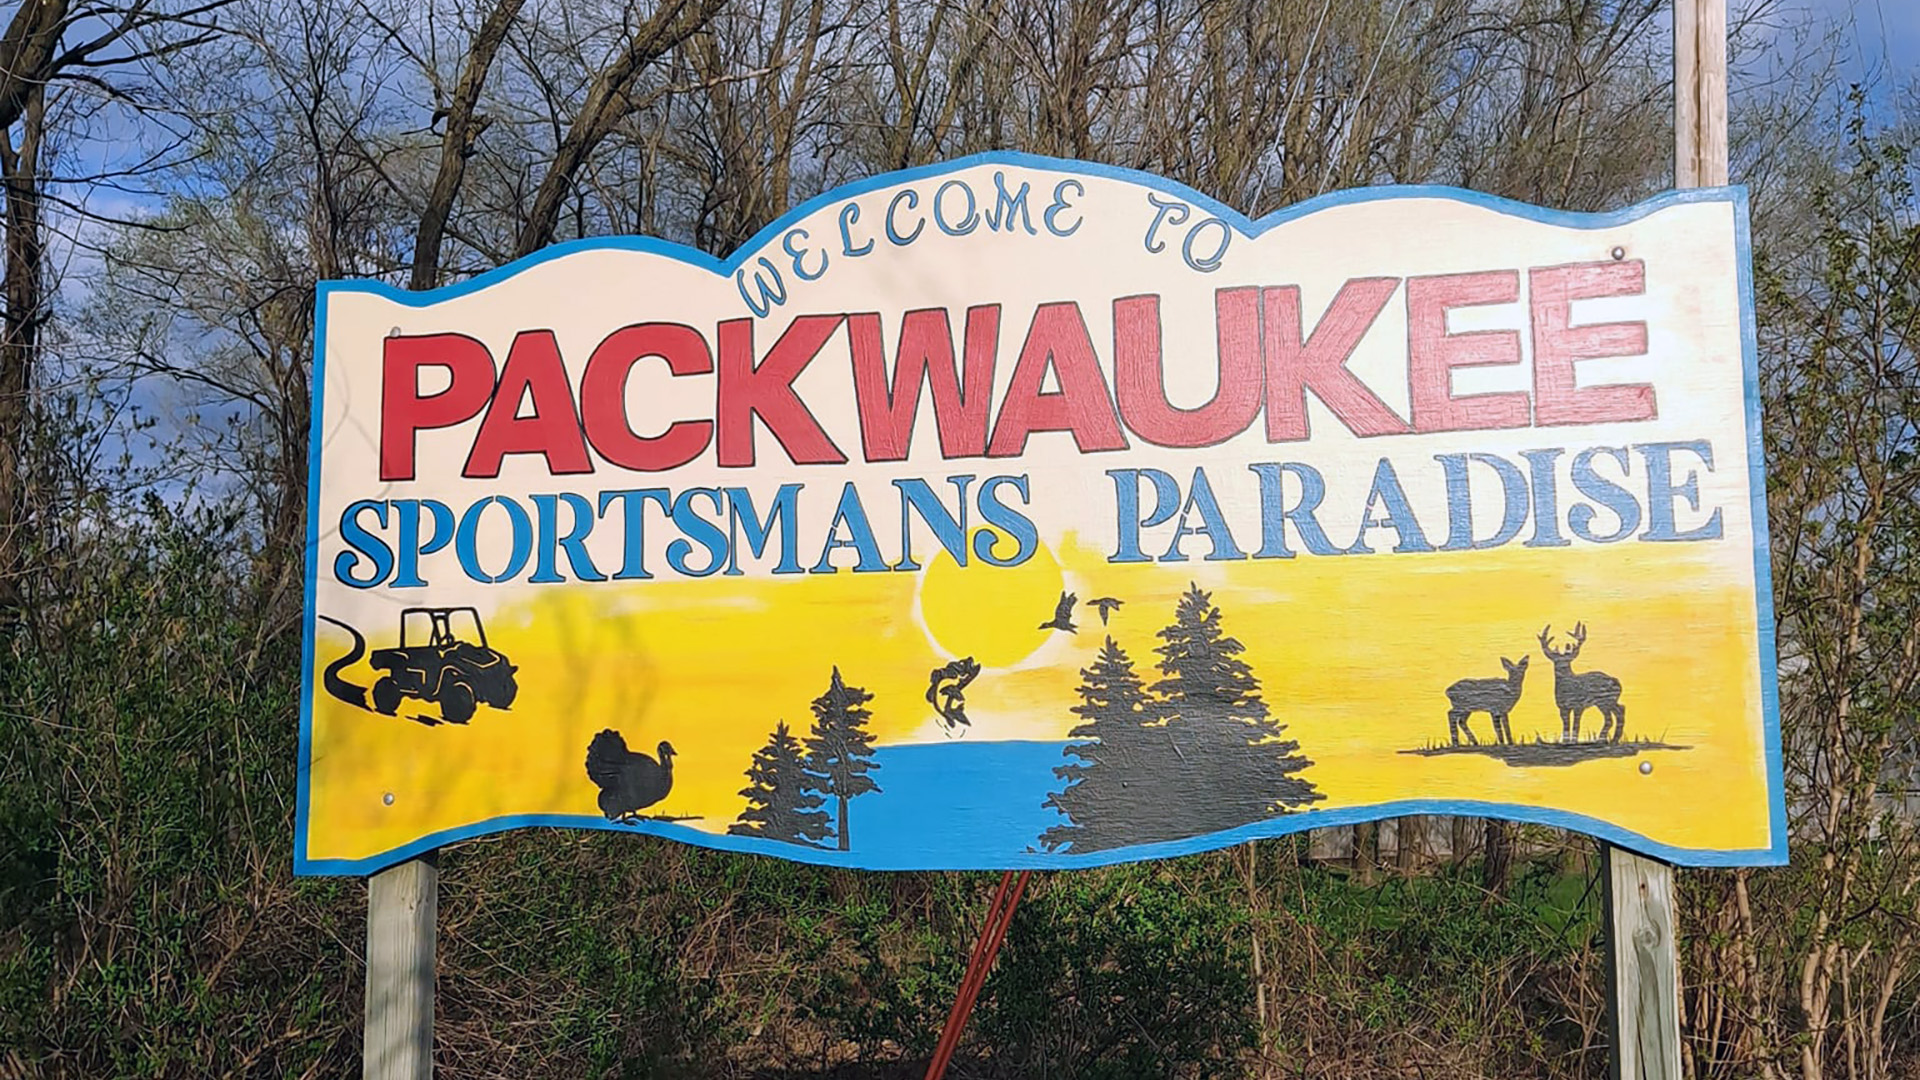 A painted wood sign reads "Welcome to Packwaukee" and "Sportsmans Paradise" above illustrations of wildlife, a UTV and trees next to water, with bushes and trees in the background.